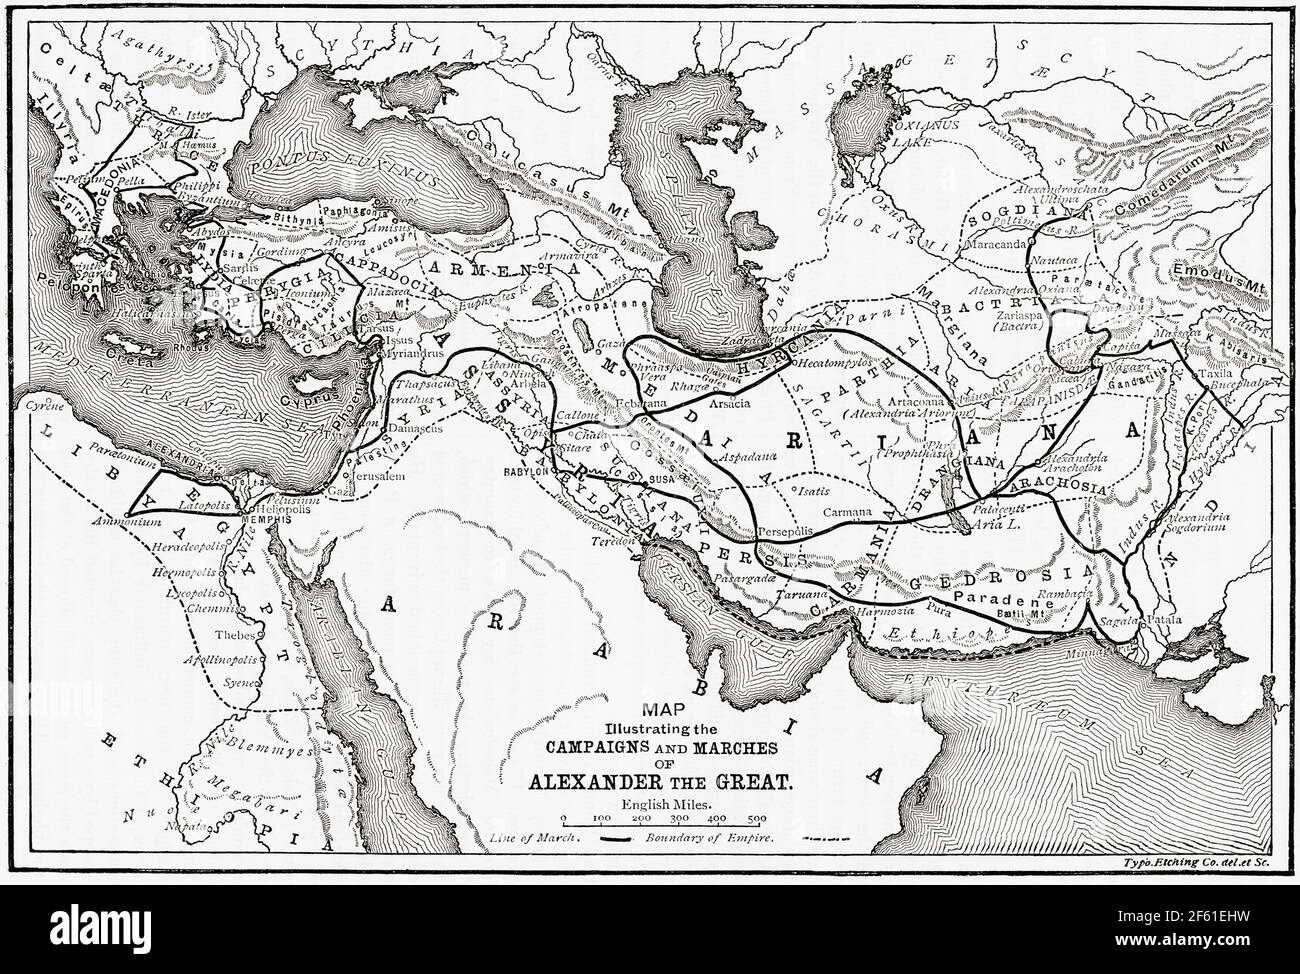 Map illustrating the campaigns and marches of Alexander the Great.  From Cassell's Universal History, published 1888. Stock Photo